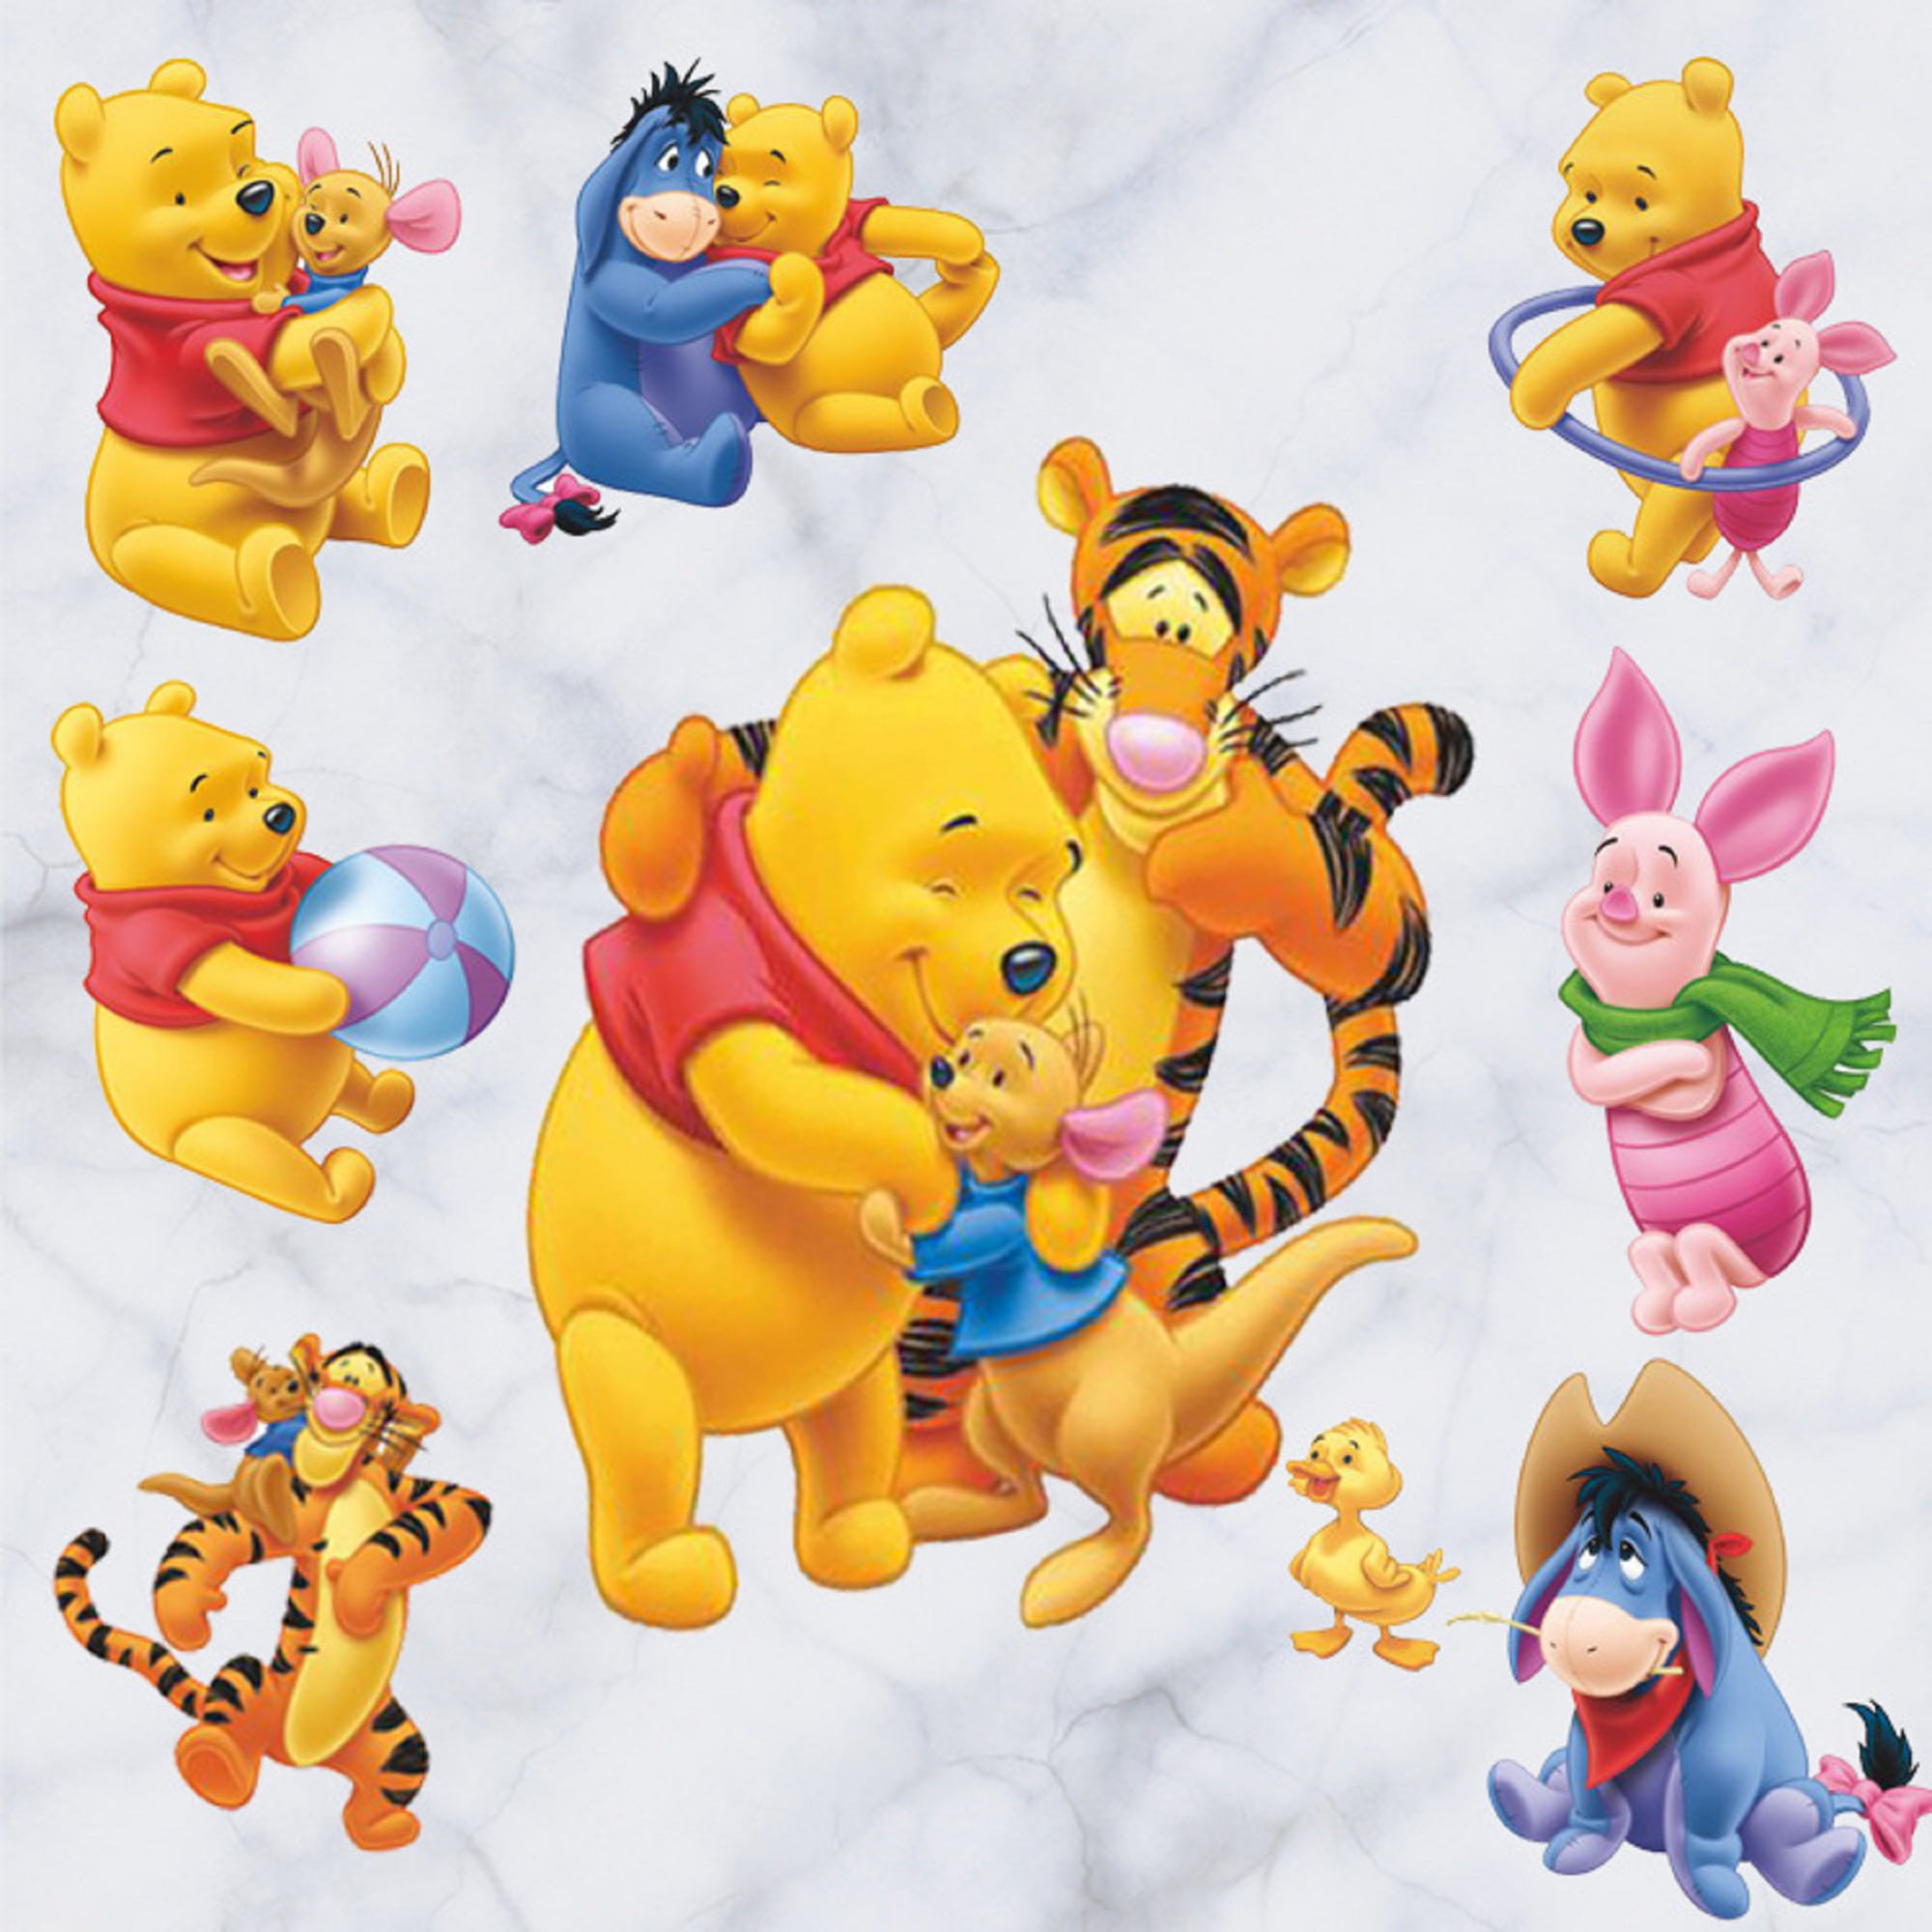 SET OF 2 DISNEY WINNIE THE POOH REMOVABLE & REUSABLE CHILDREN/KIDS WALL STICKERS 